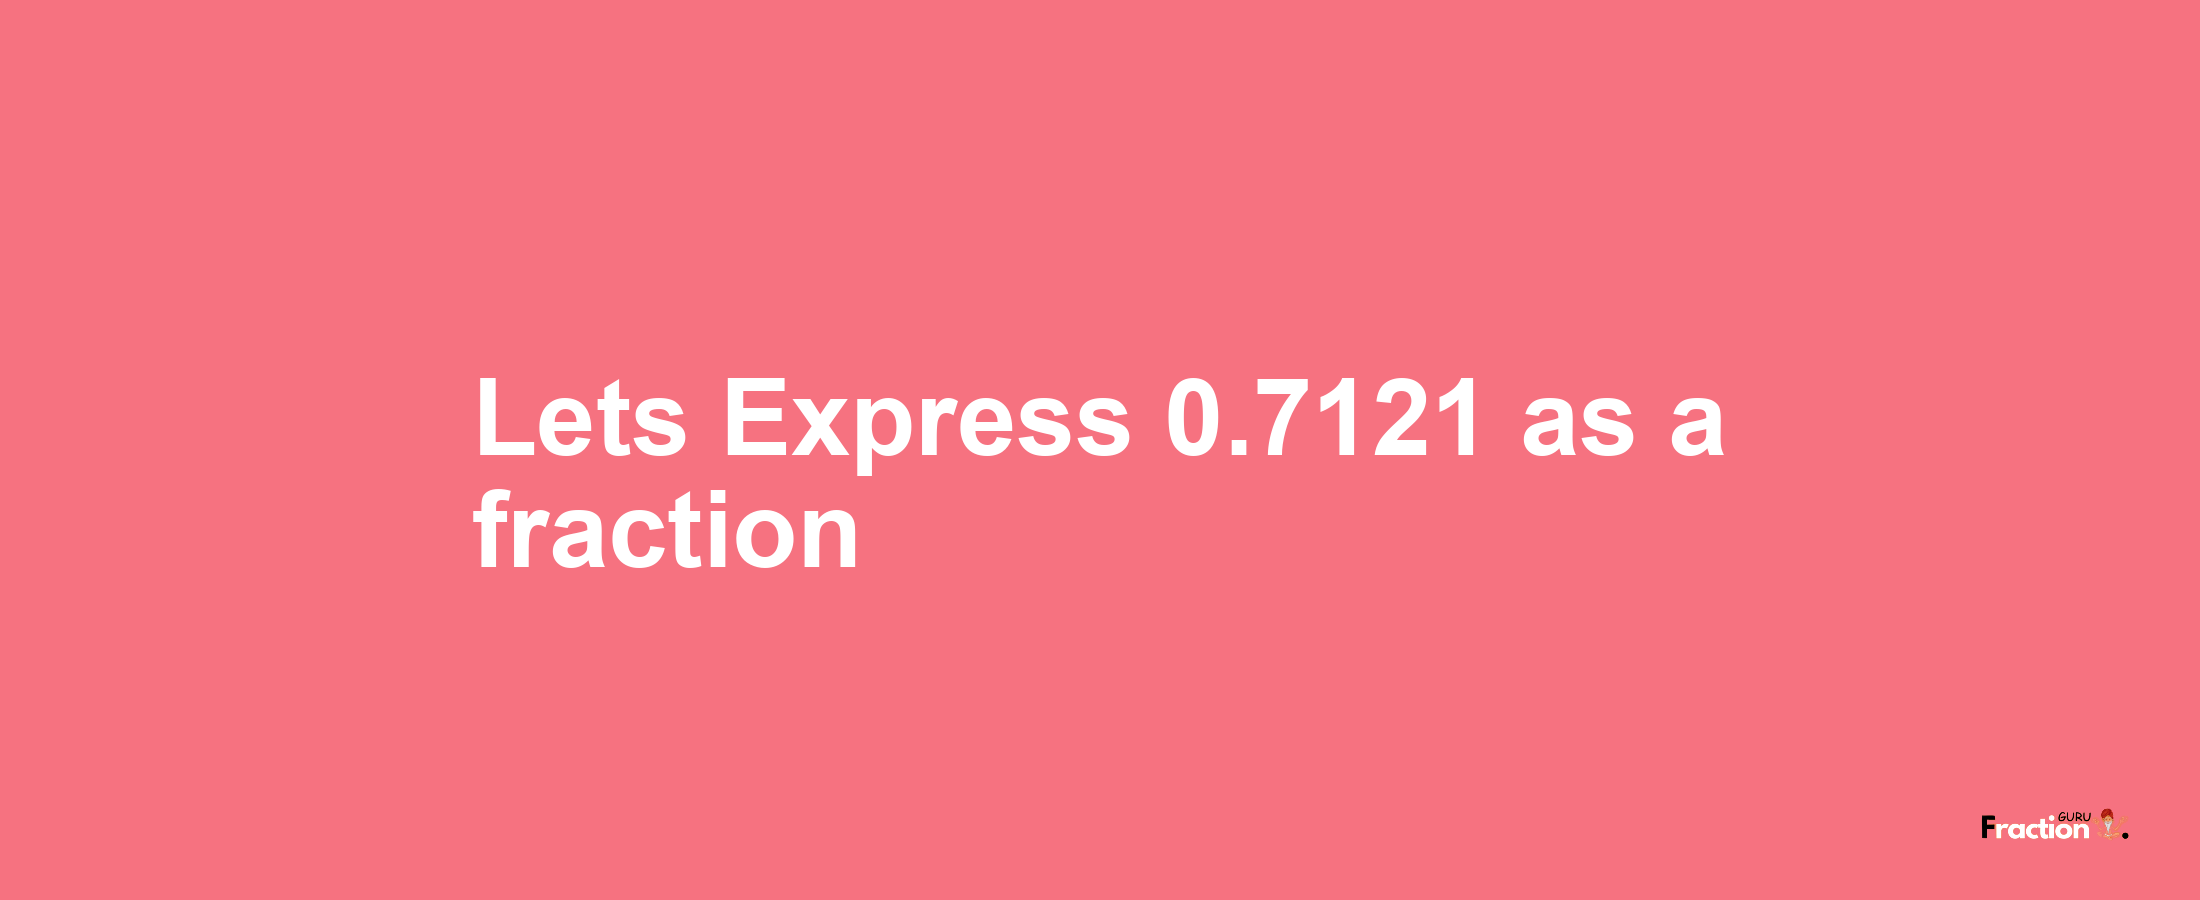 Lets Express 0.7121 as afraction